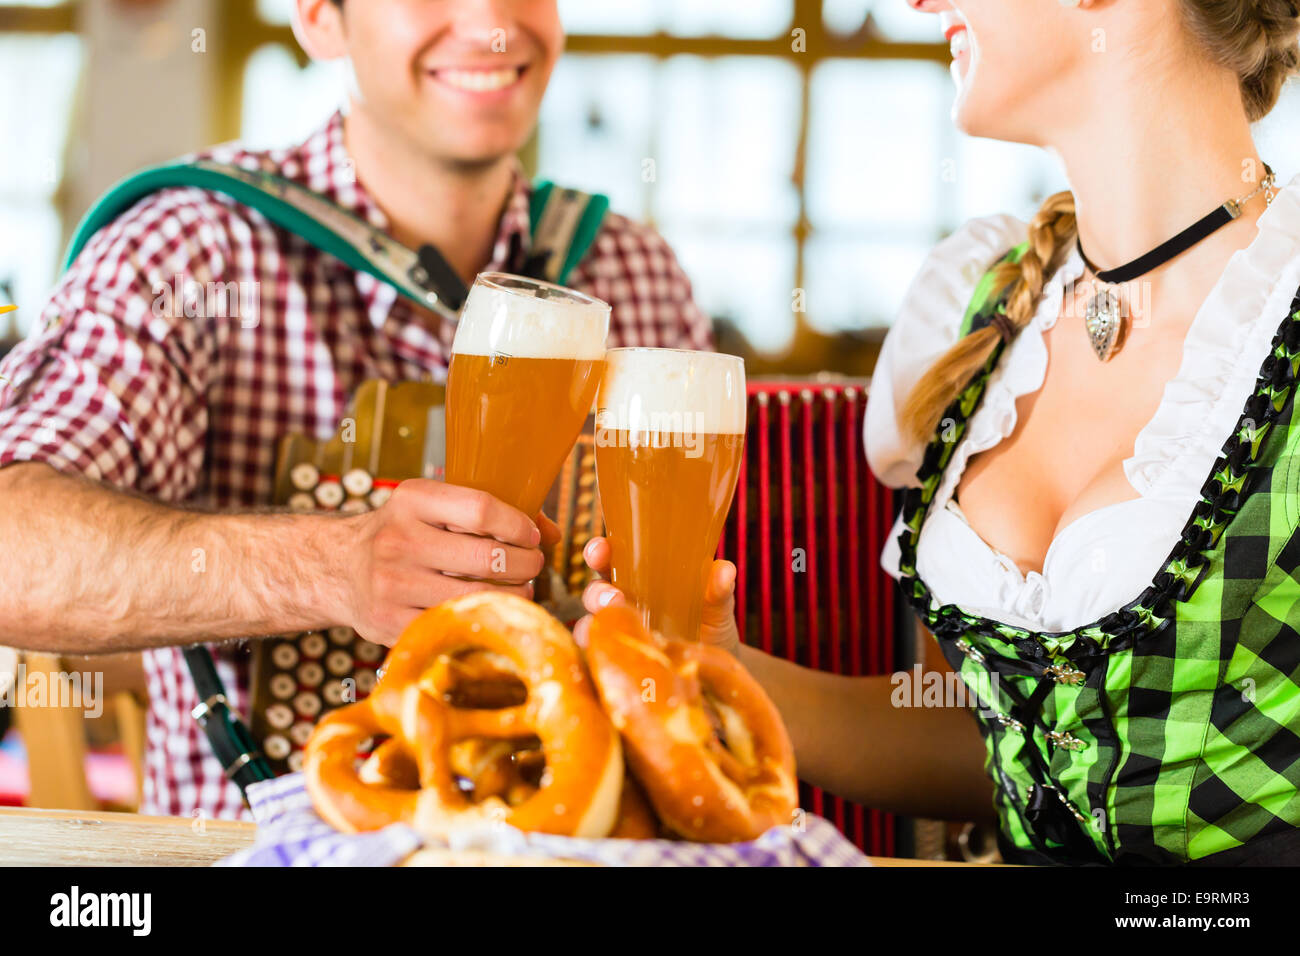 Bavarian restaurant with music, guests, wheat beer and pretzels Stock Photo